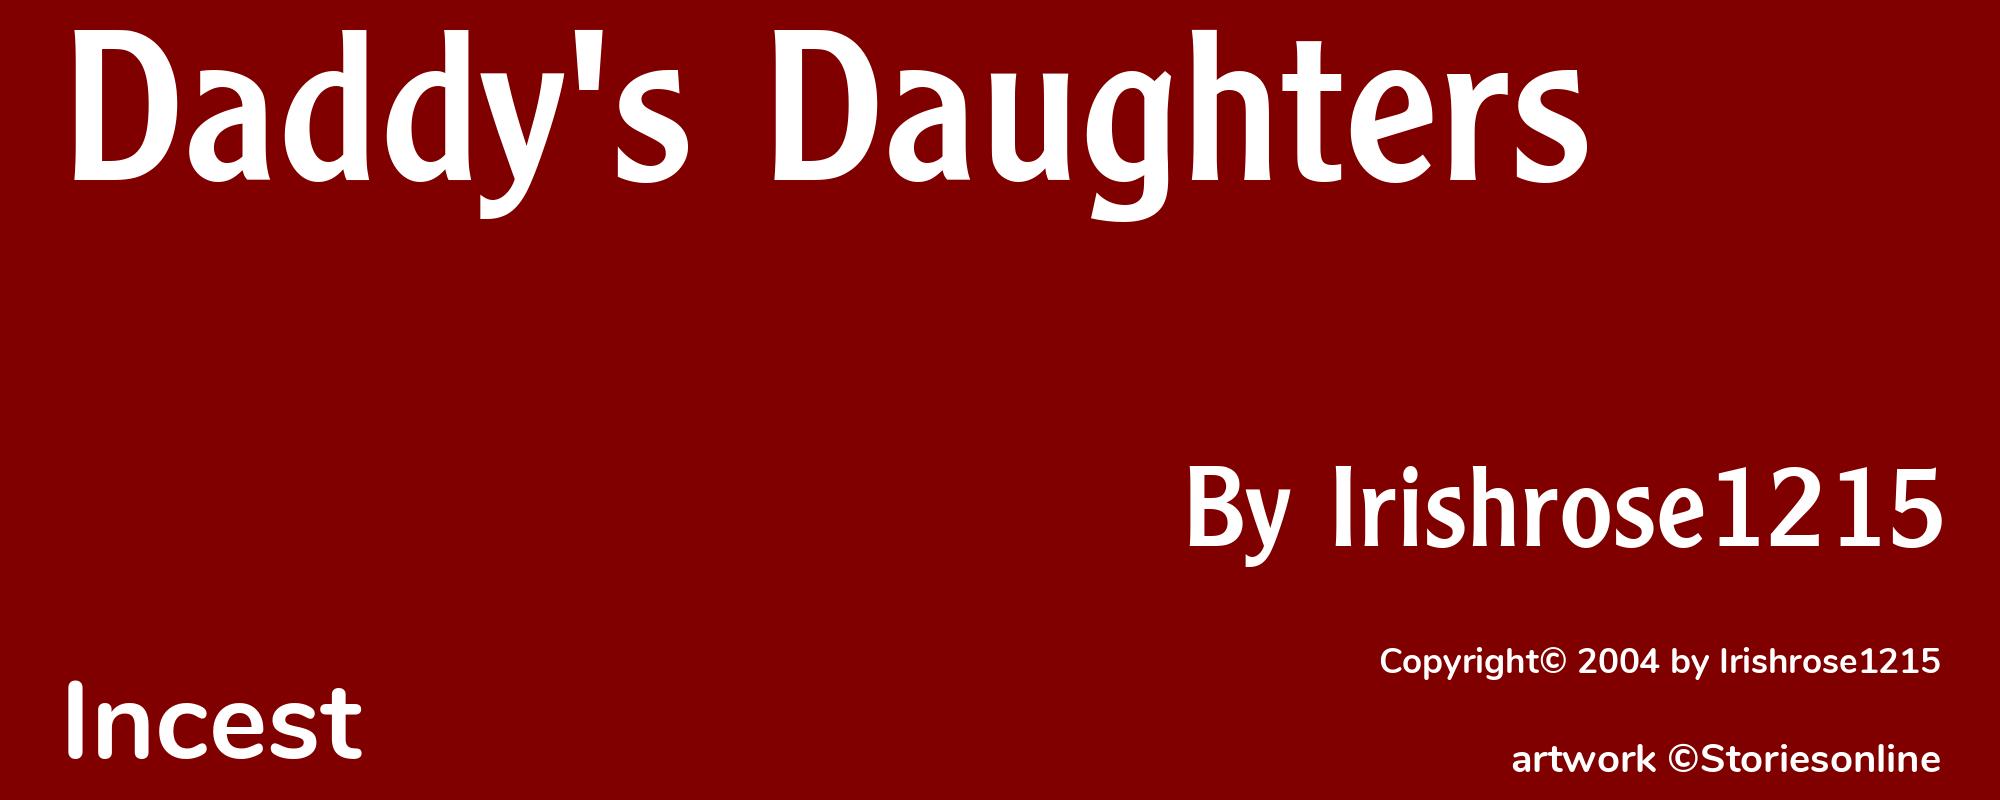 Daddy's Daughters - Cover